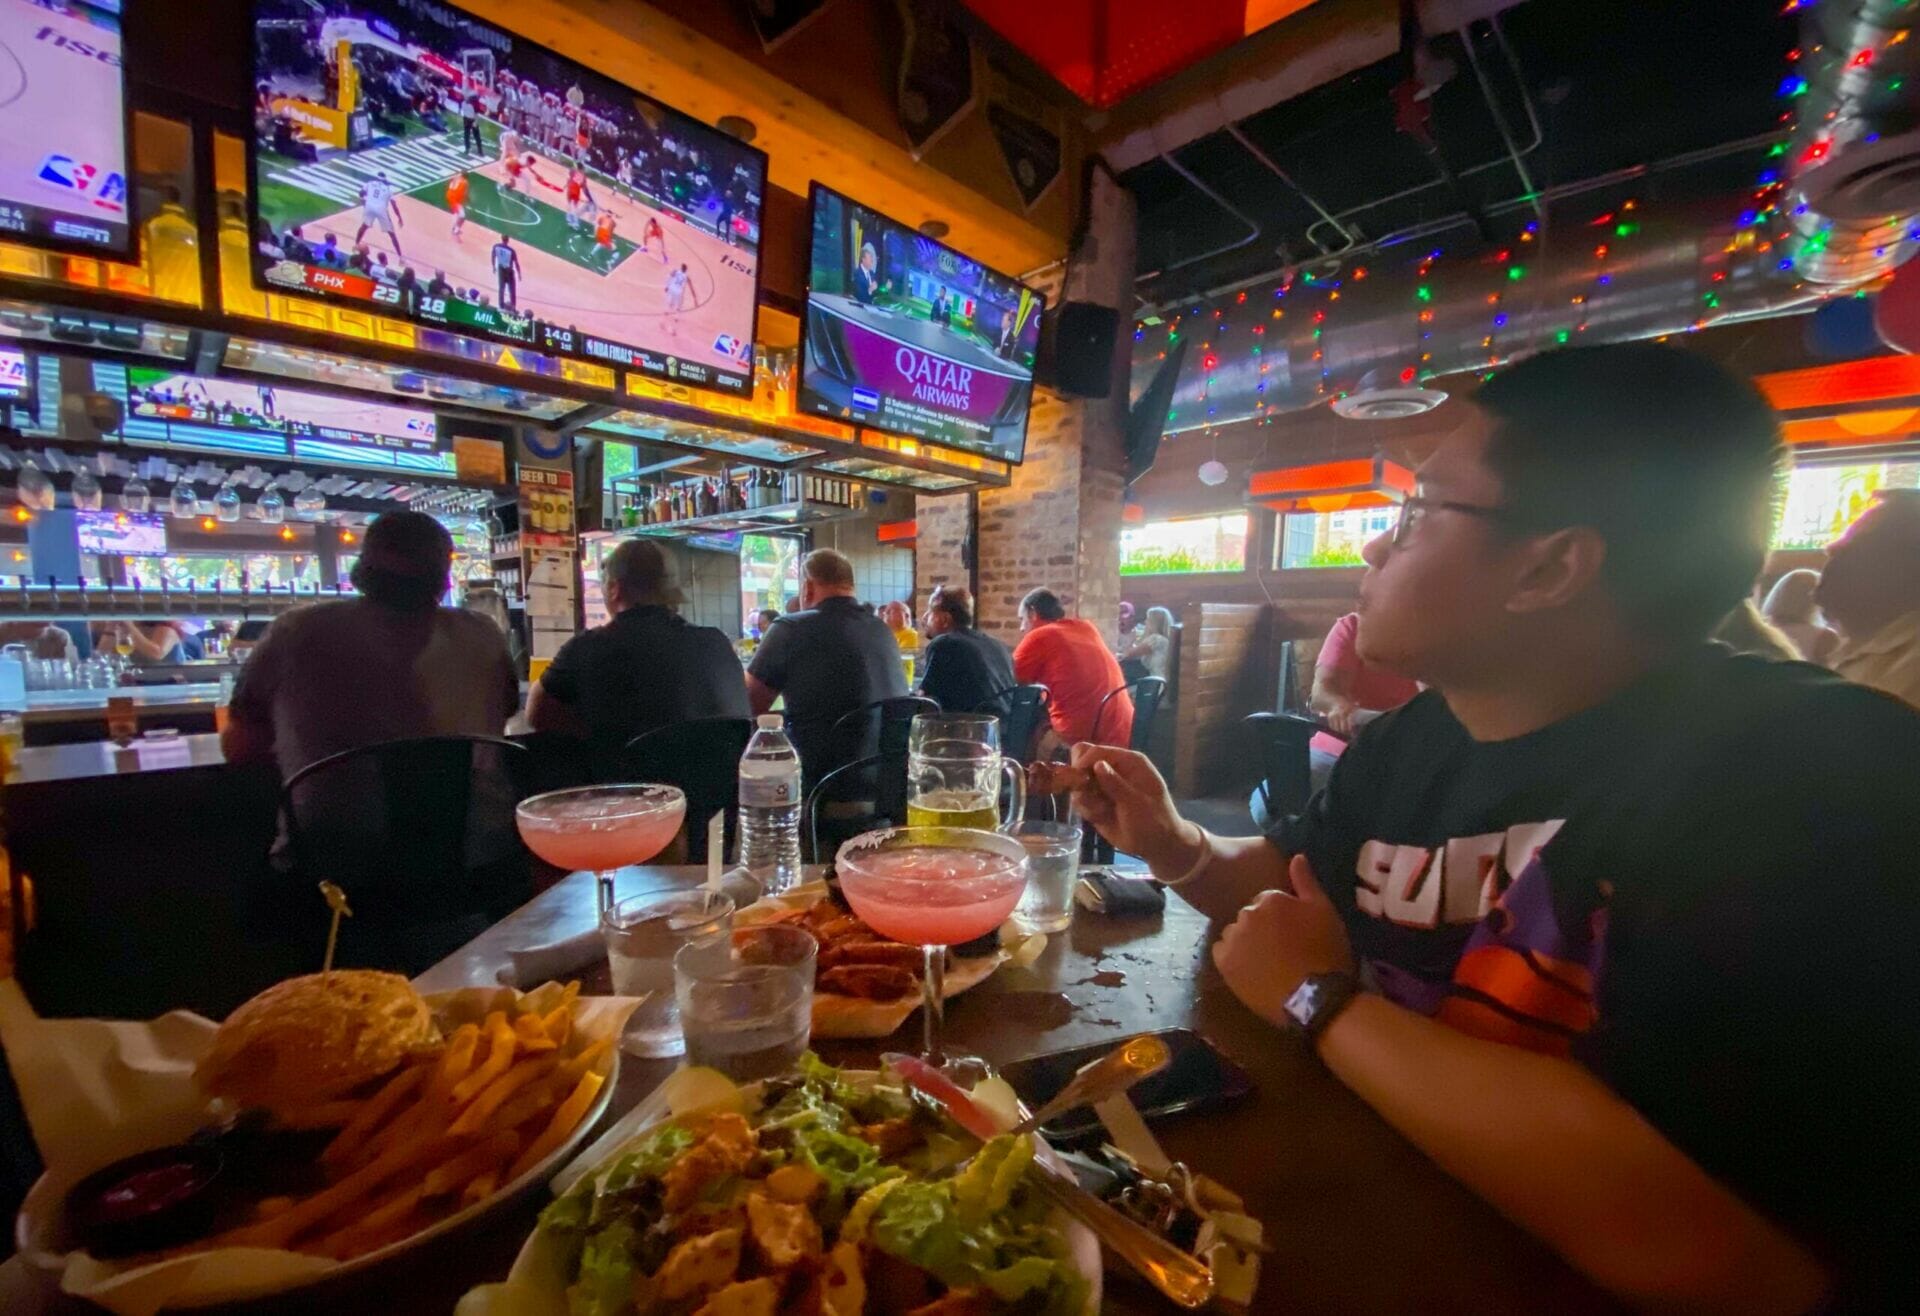 Are You Ready for Some Football?! Dave & Buster's Sports Bar Is